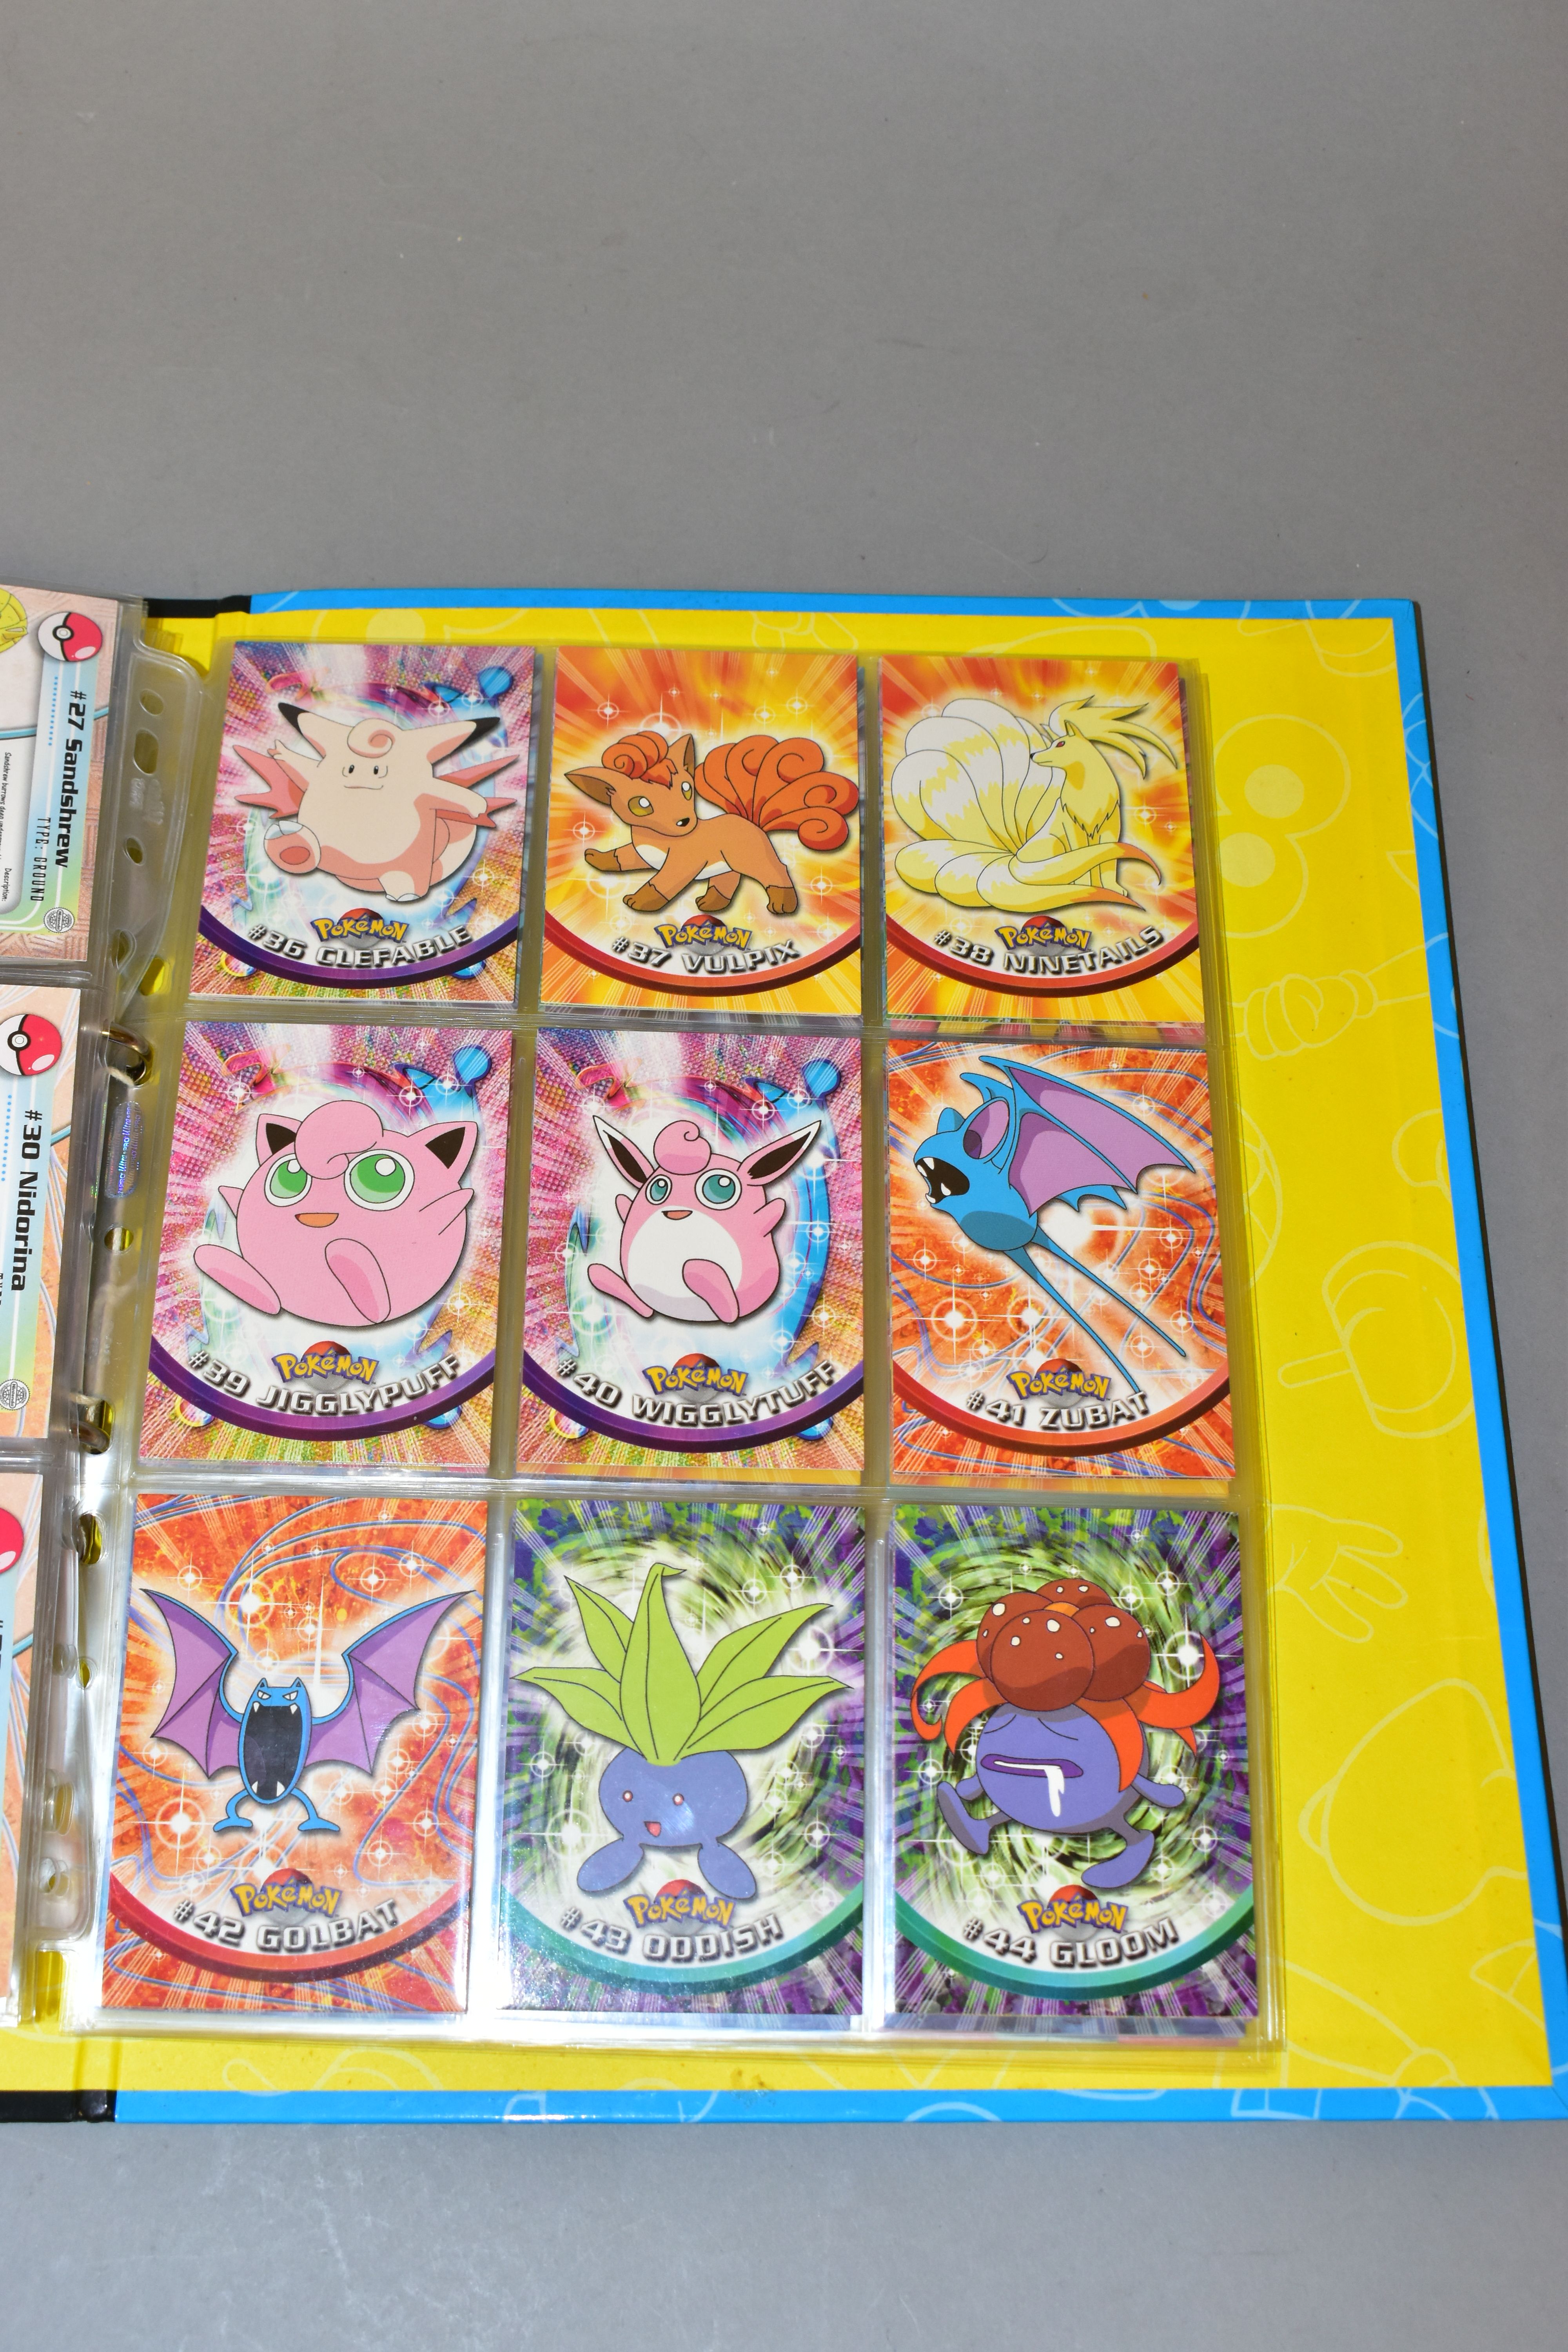 A COMPLETE SET OF THE TOPPS POKEMON TRADING CARDS SERIES 1, all 76 cards plus the 13 character cards - Image 16 of 20